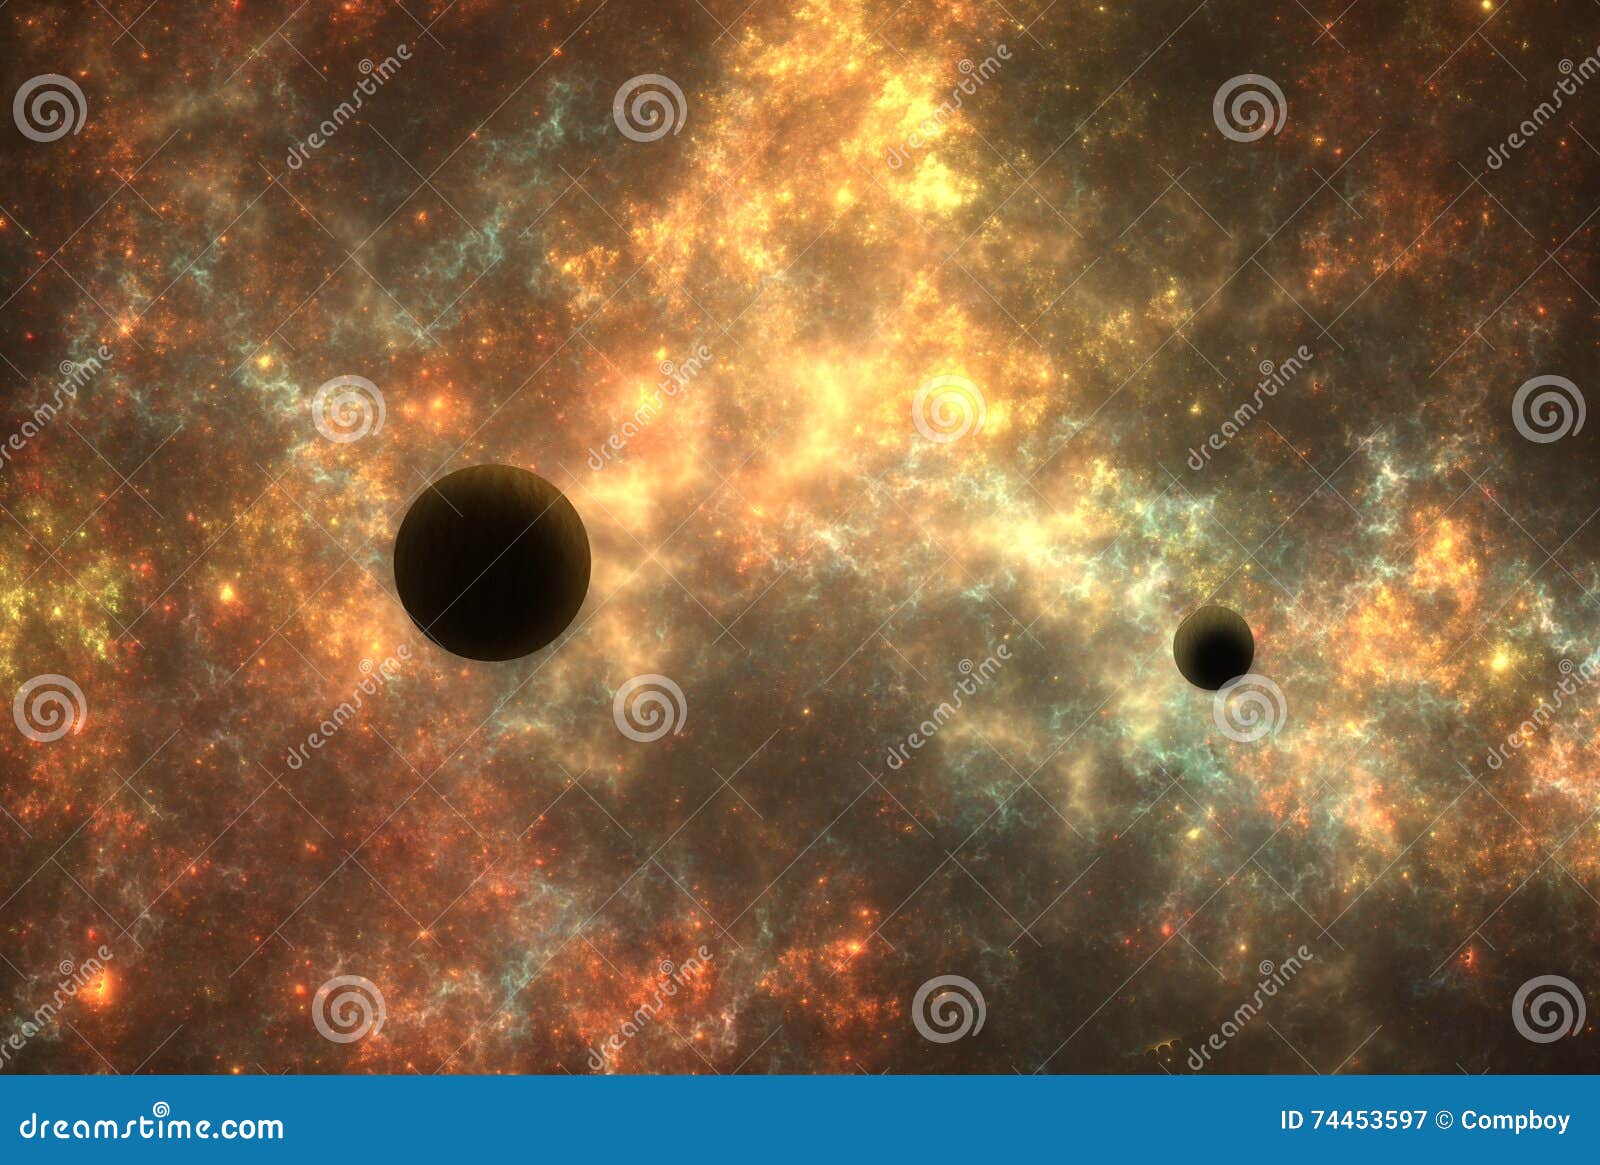 deep space nebula with planets